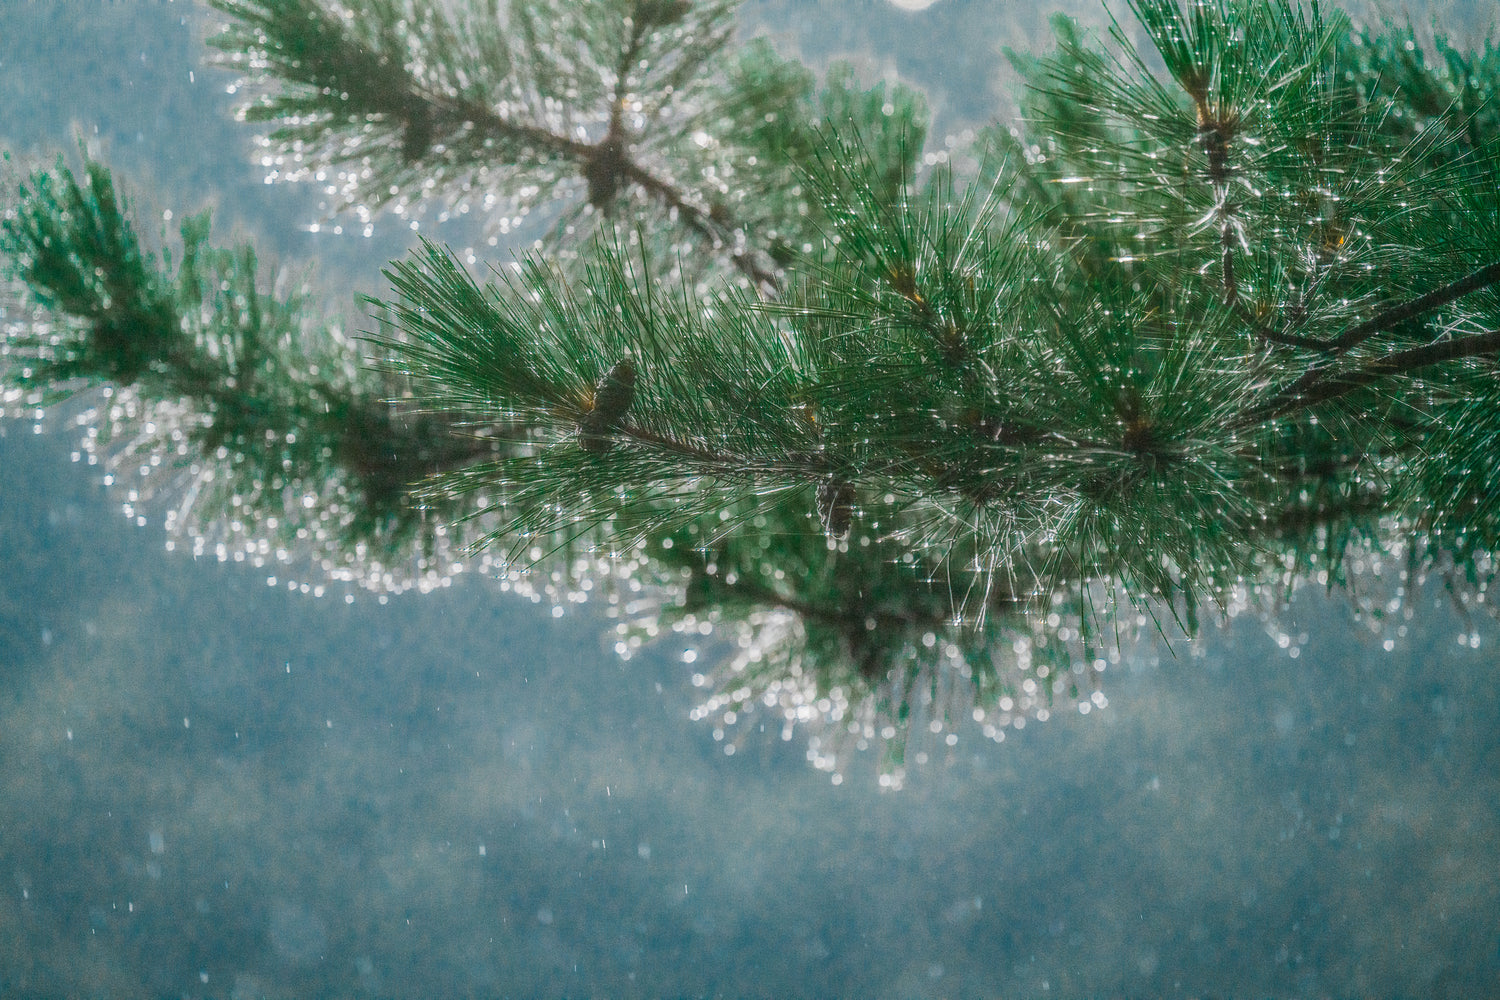 Image of pine branch with dew drops. Terrain UL mission text across image.  Educating, empowering and supporting our local and outdoor communities to ensure the outdoors are kept wild for everyone.